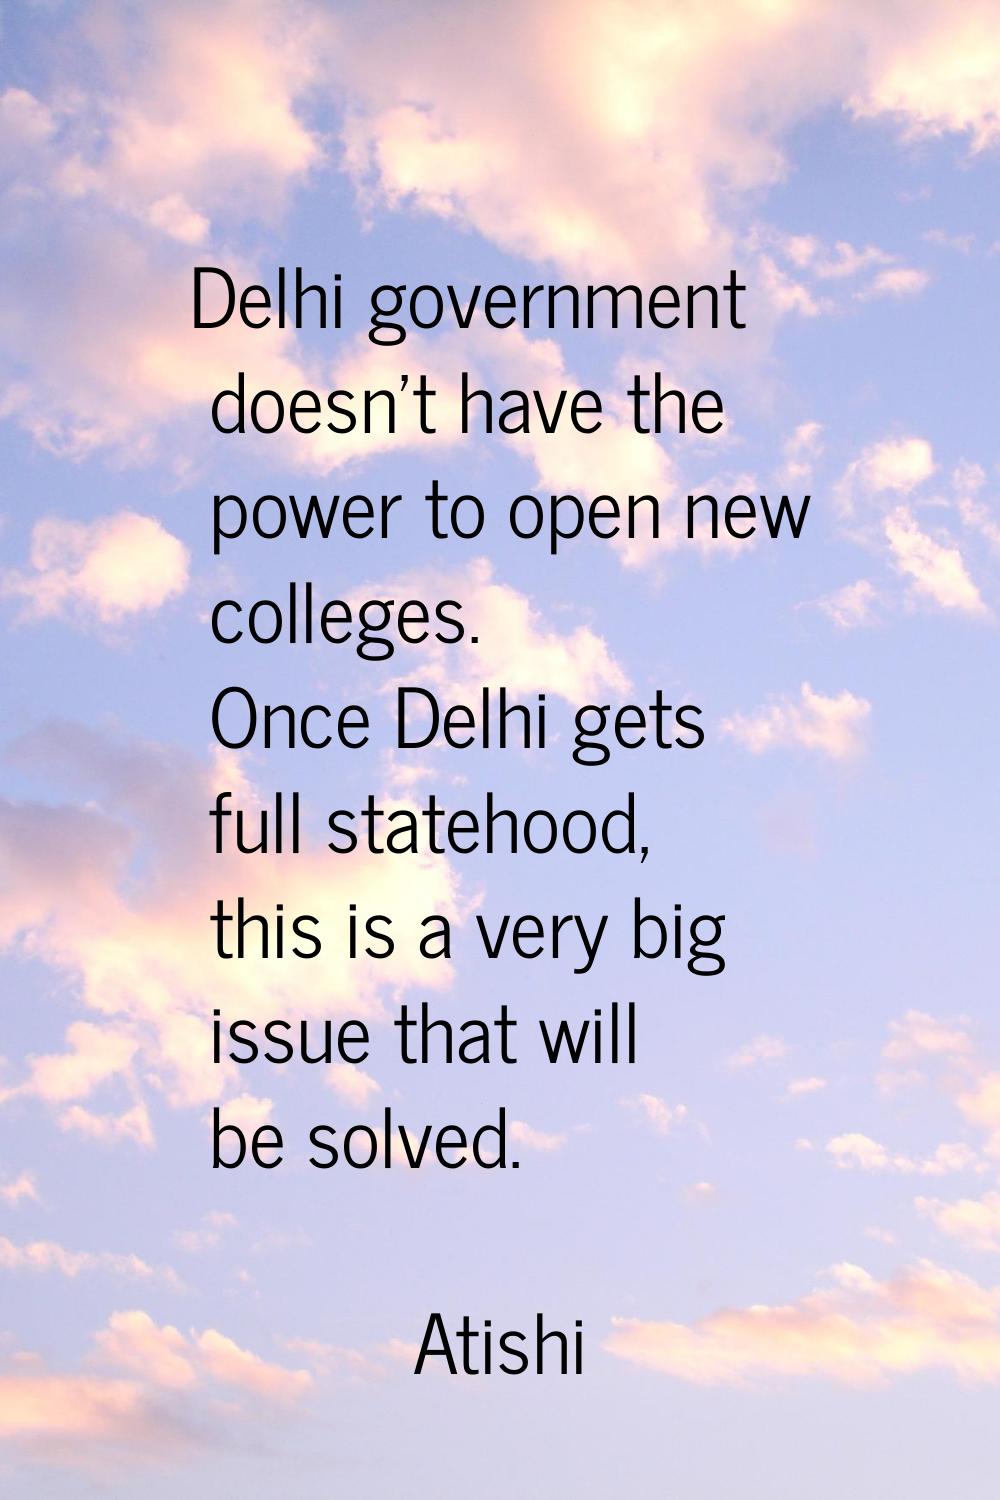 Delhi government doesn't have the power to open new colleges. Once Delhi gets full statehood, this 